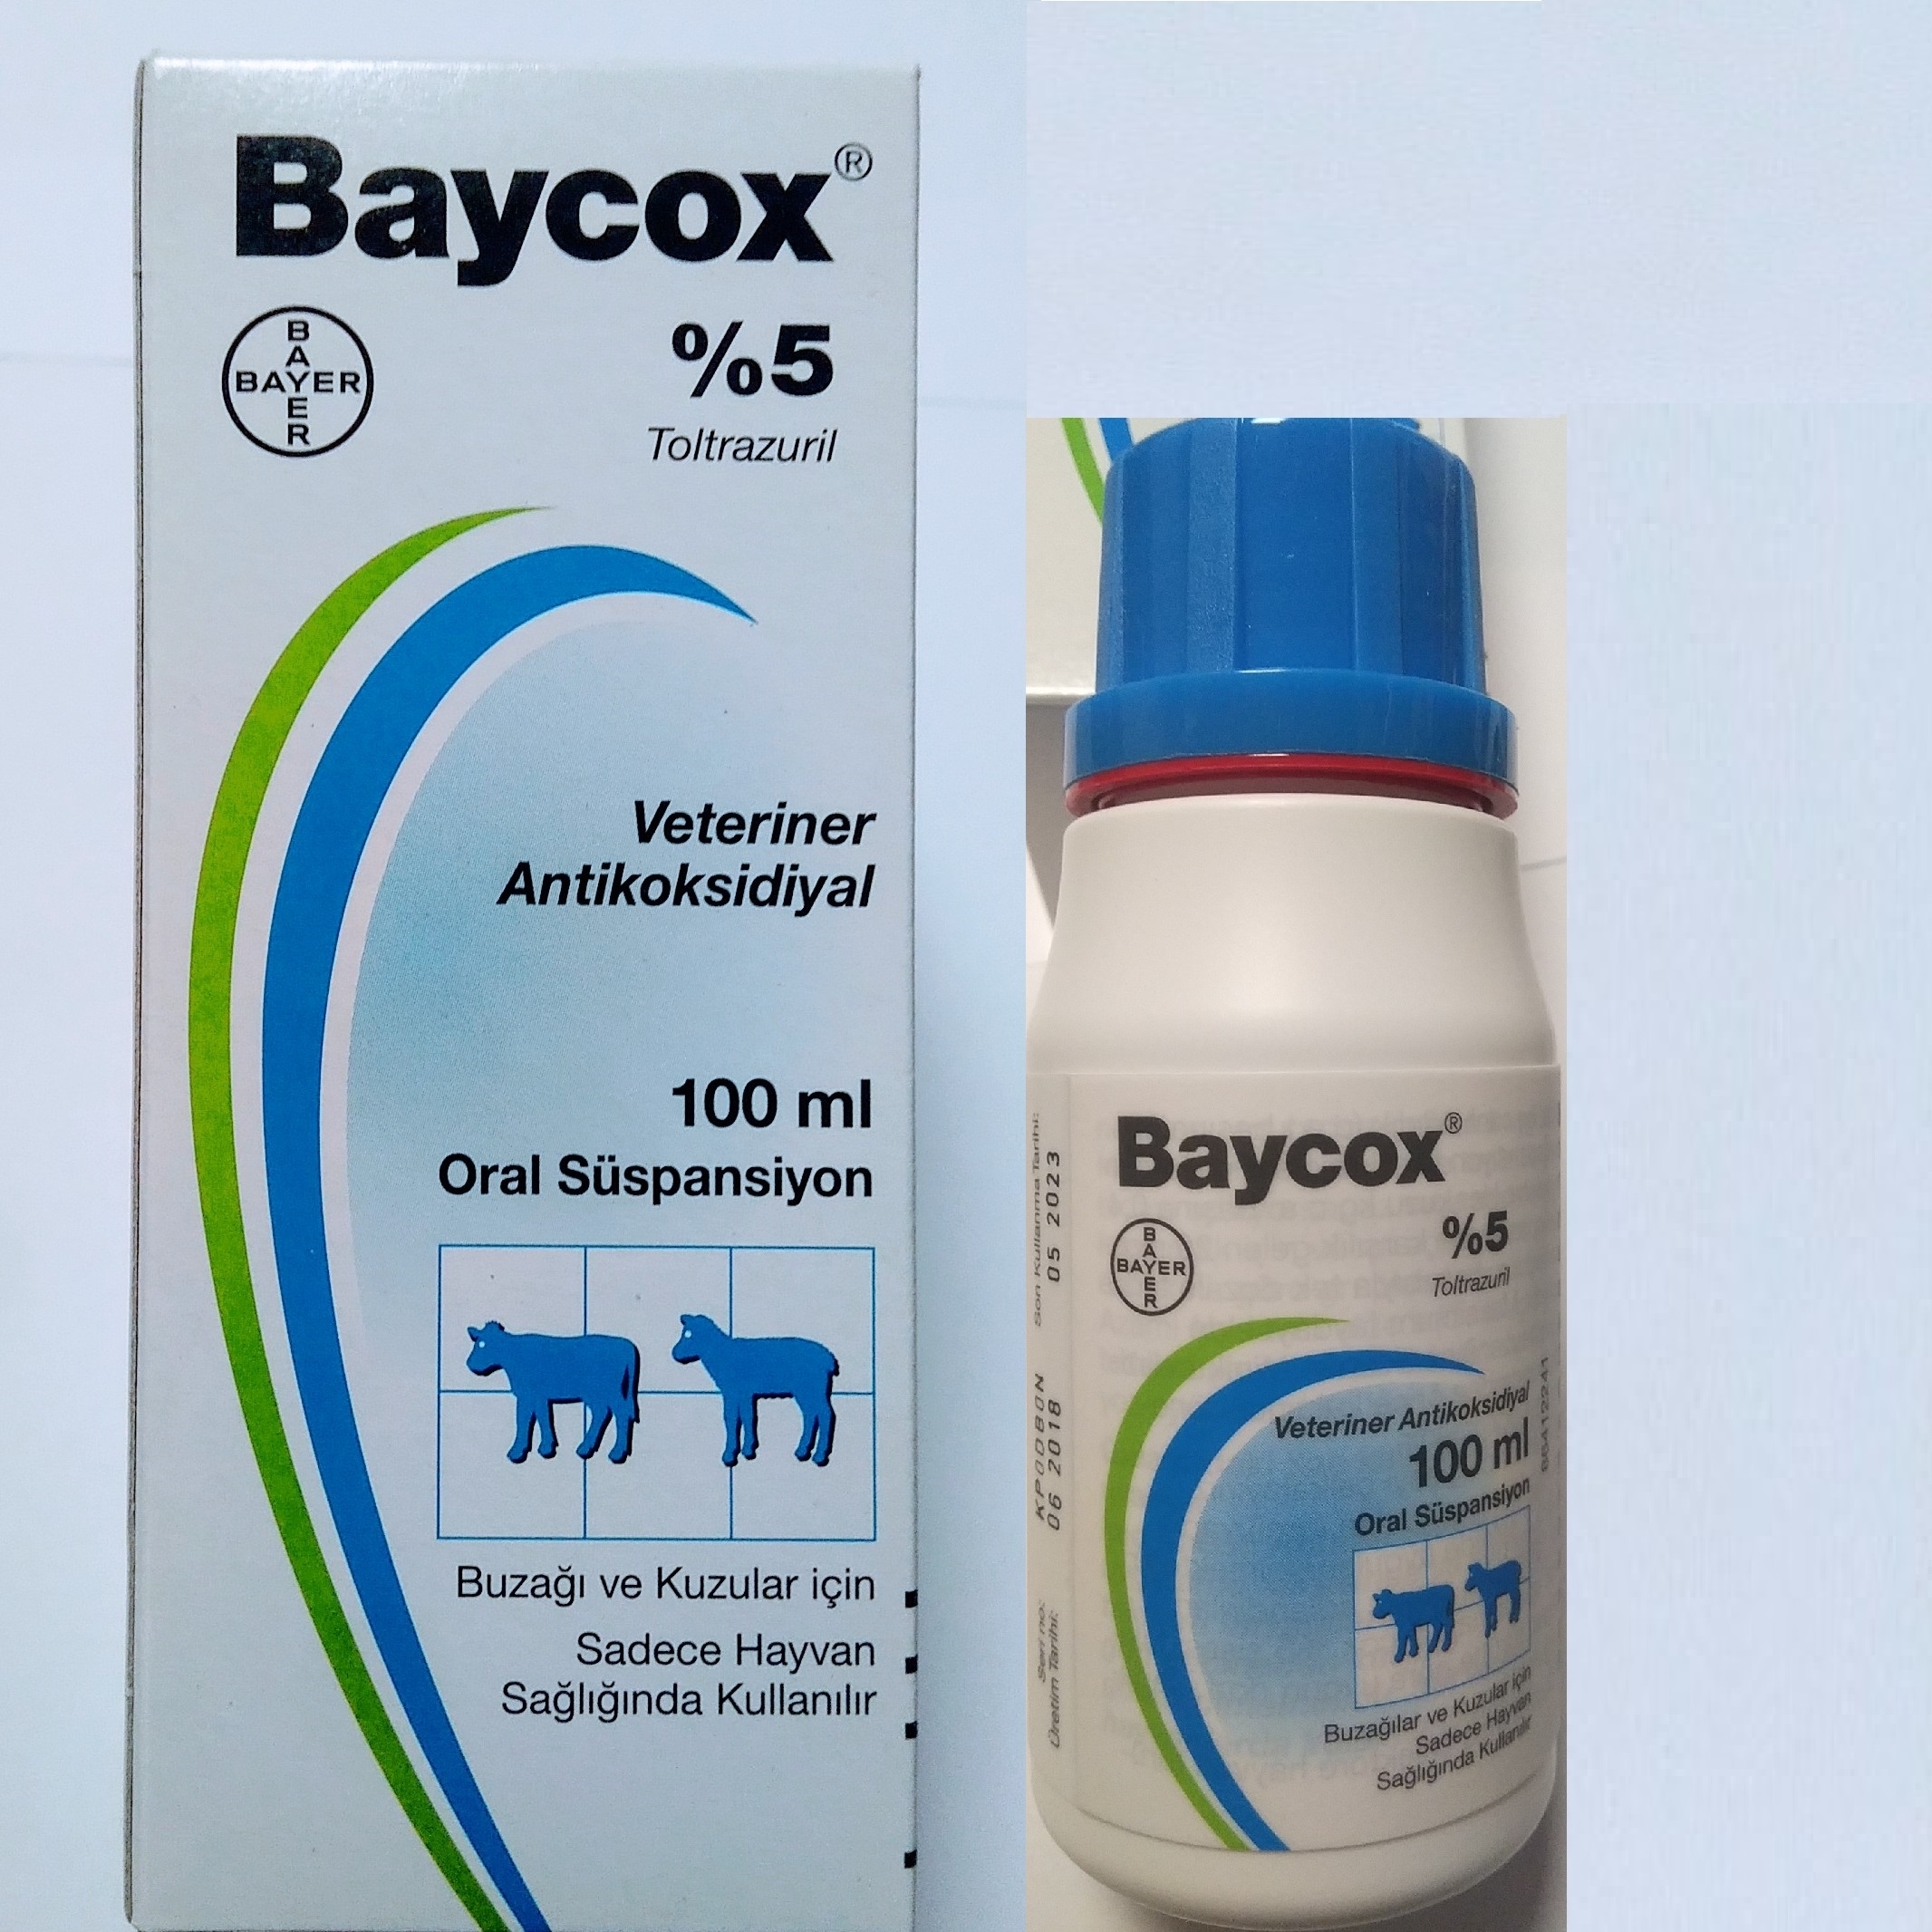 Baycox (toltrazuril) 5% Oral Suspension 100 ml, for calf, lamb and piglet